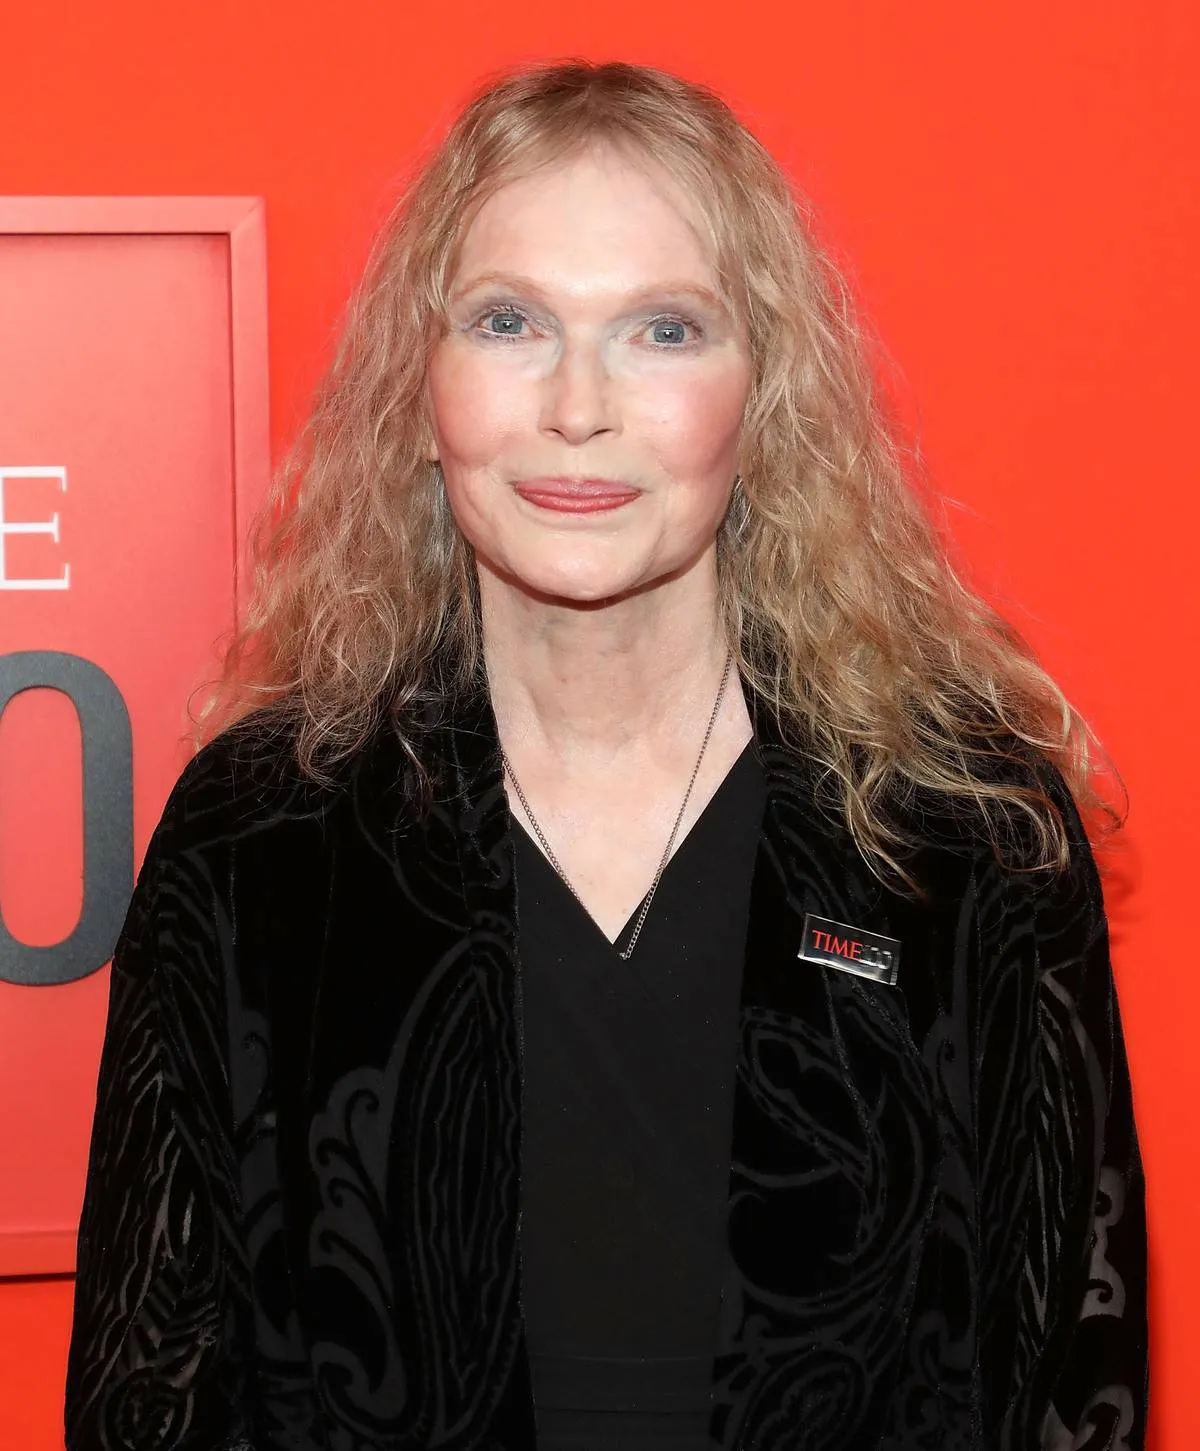 Mia Farrow attends the 2019 Time 100 Gala at Frederick P. Rose Hall, Jazz at Lincoln Center on April 23, 2019 in New York City.